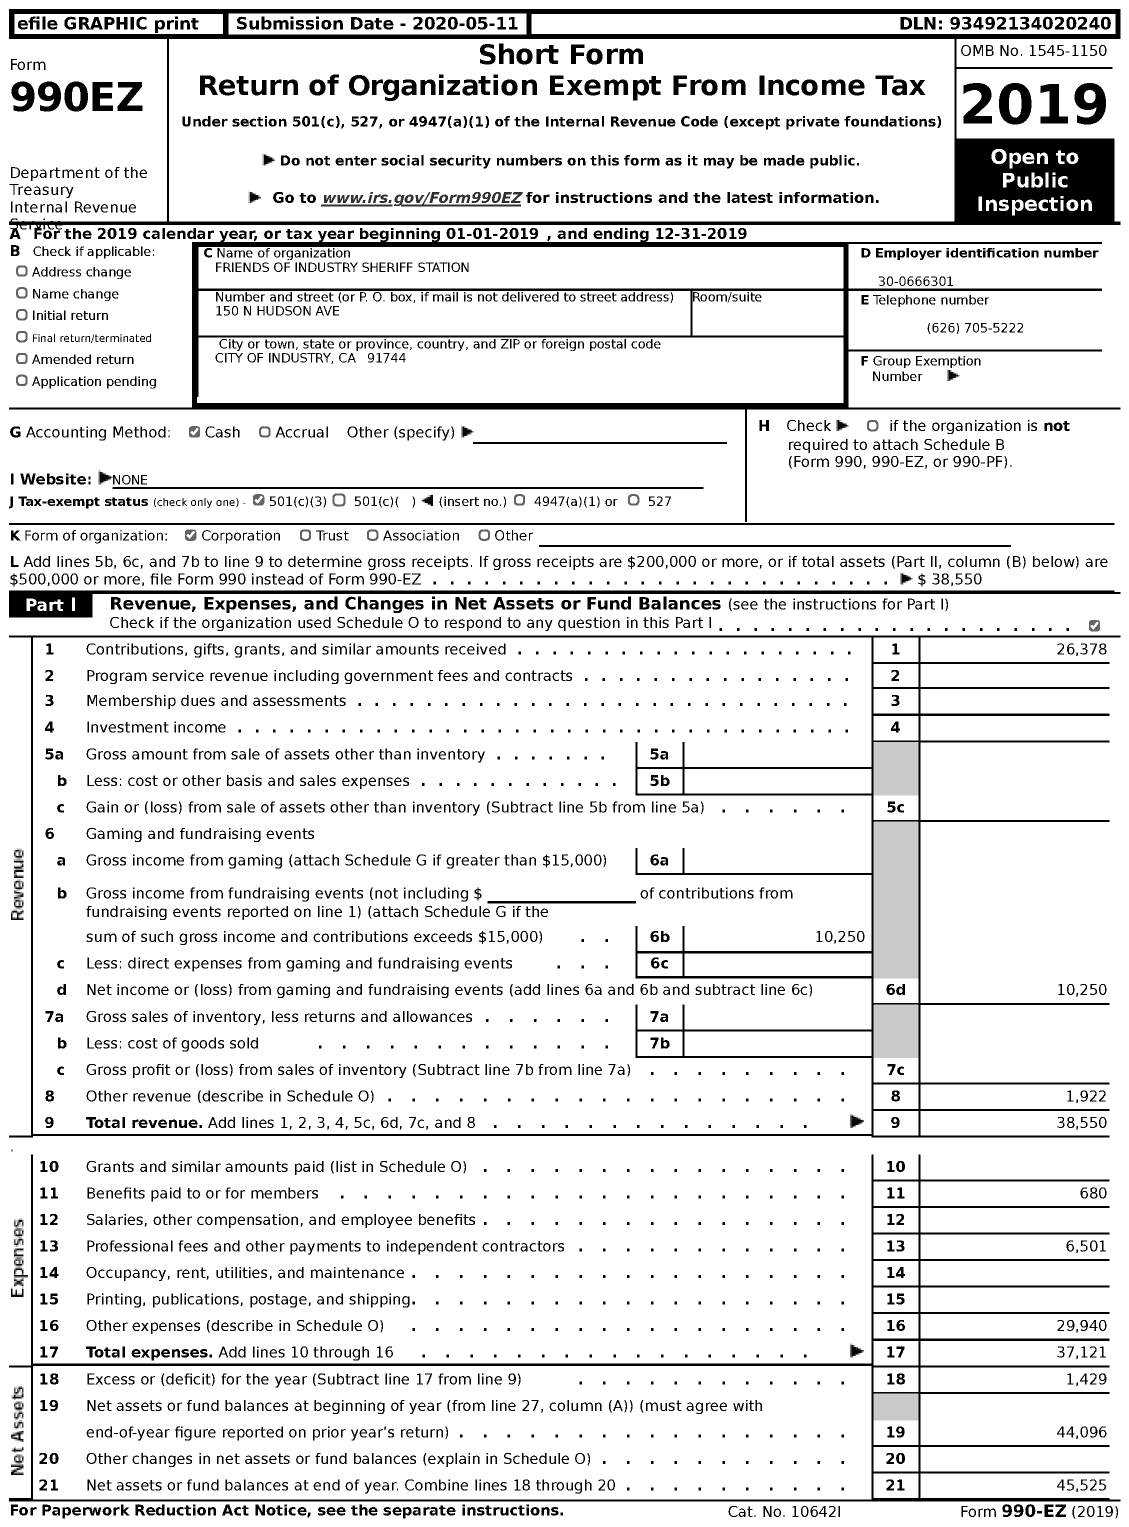 Image of first page of 2019 Form 990EZ for Friends of Industry Sheriff Station